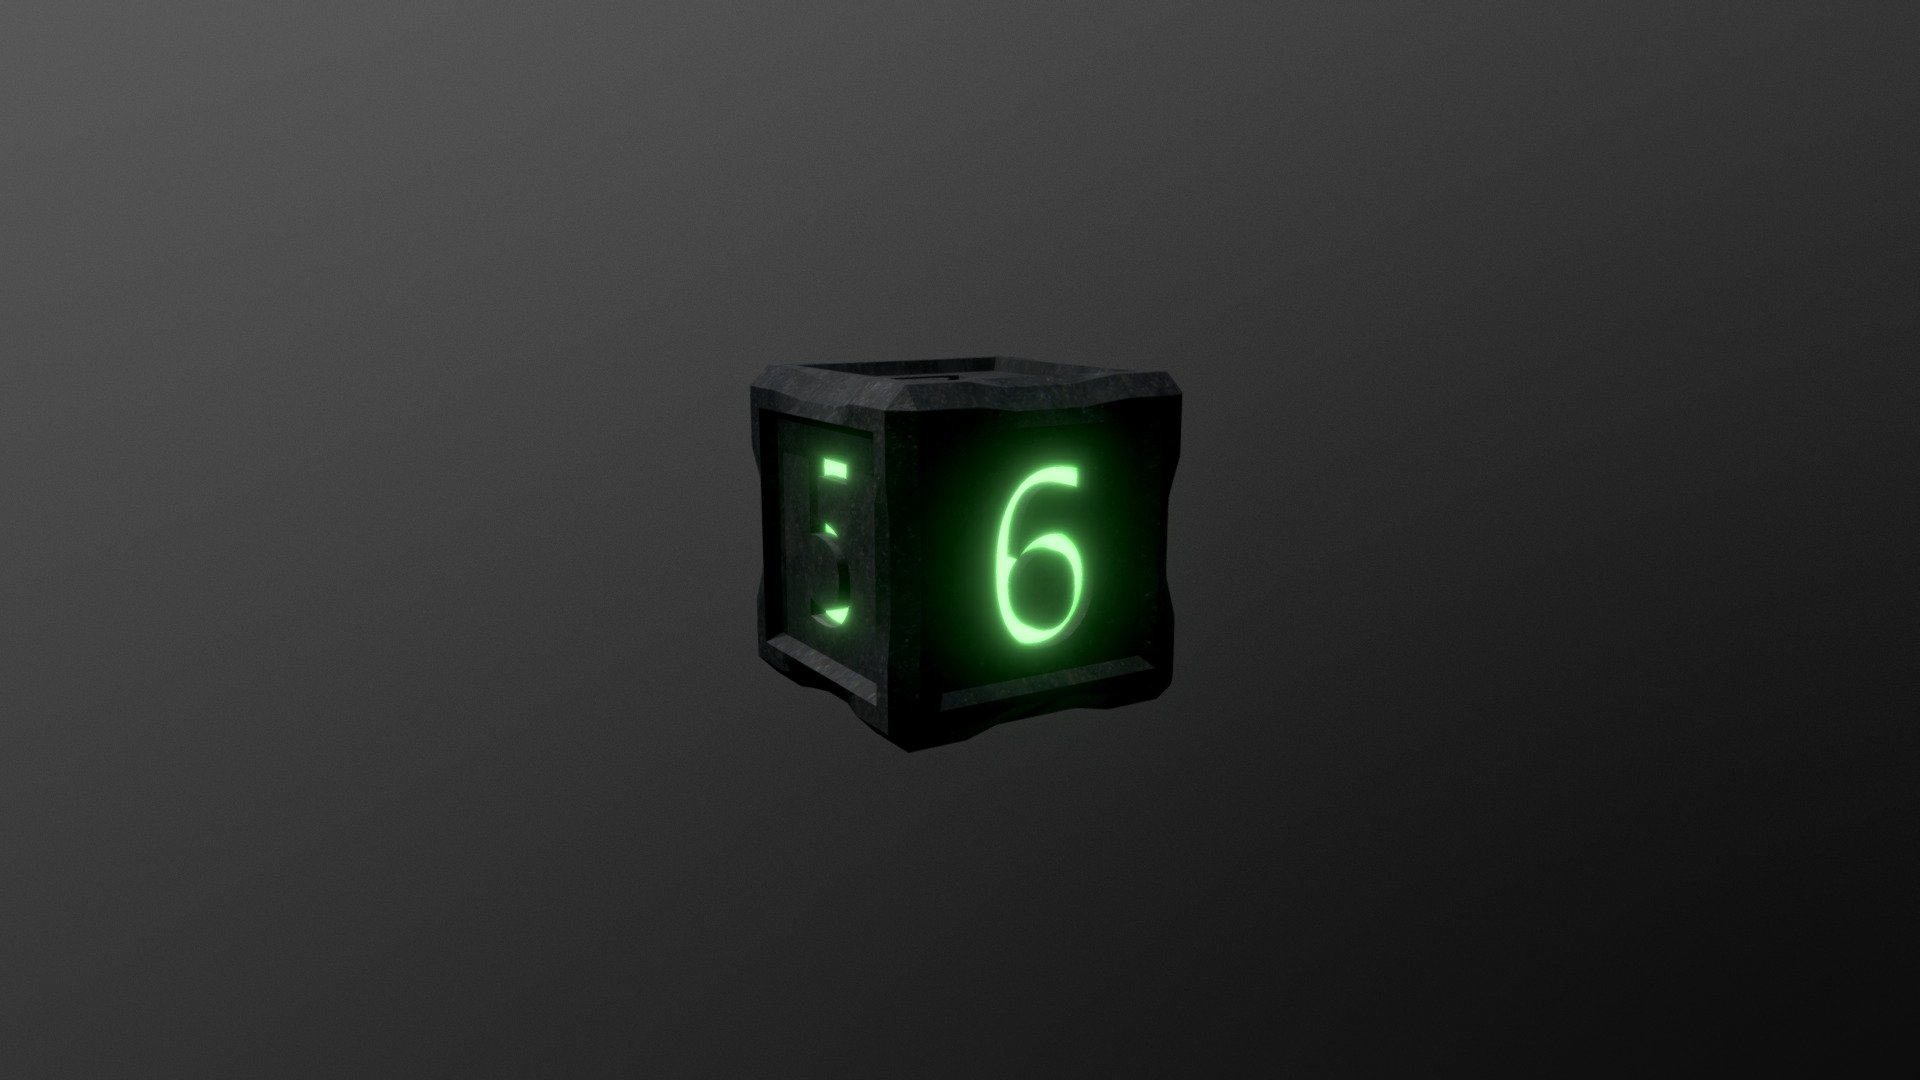 Simple model made in Maya using basic geometry and an emmision texture to get the glowing numbers on the dice face 3d model